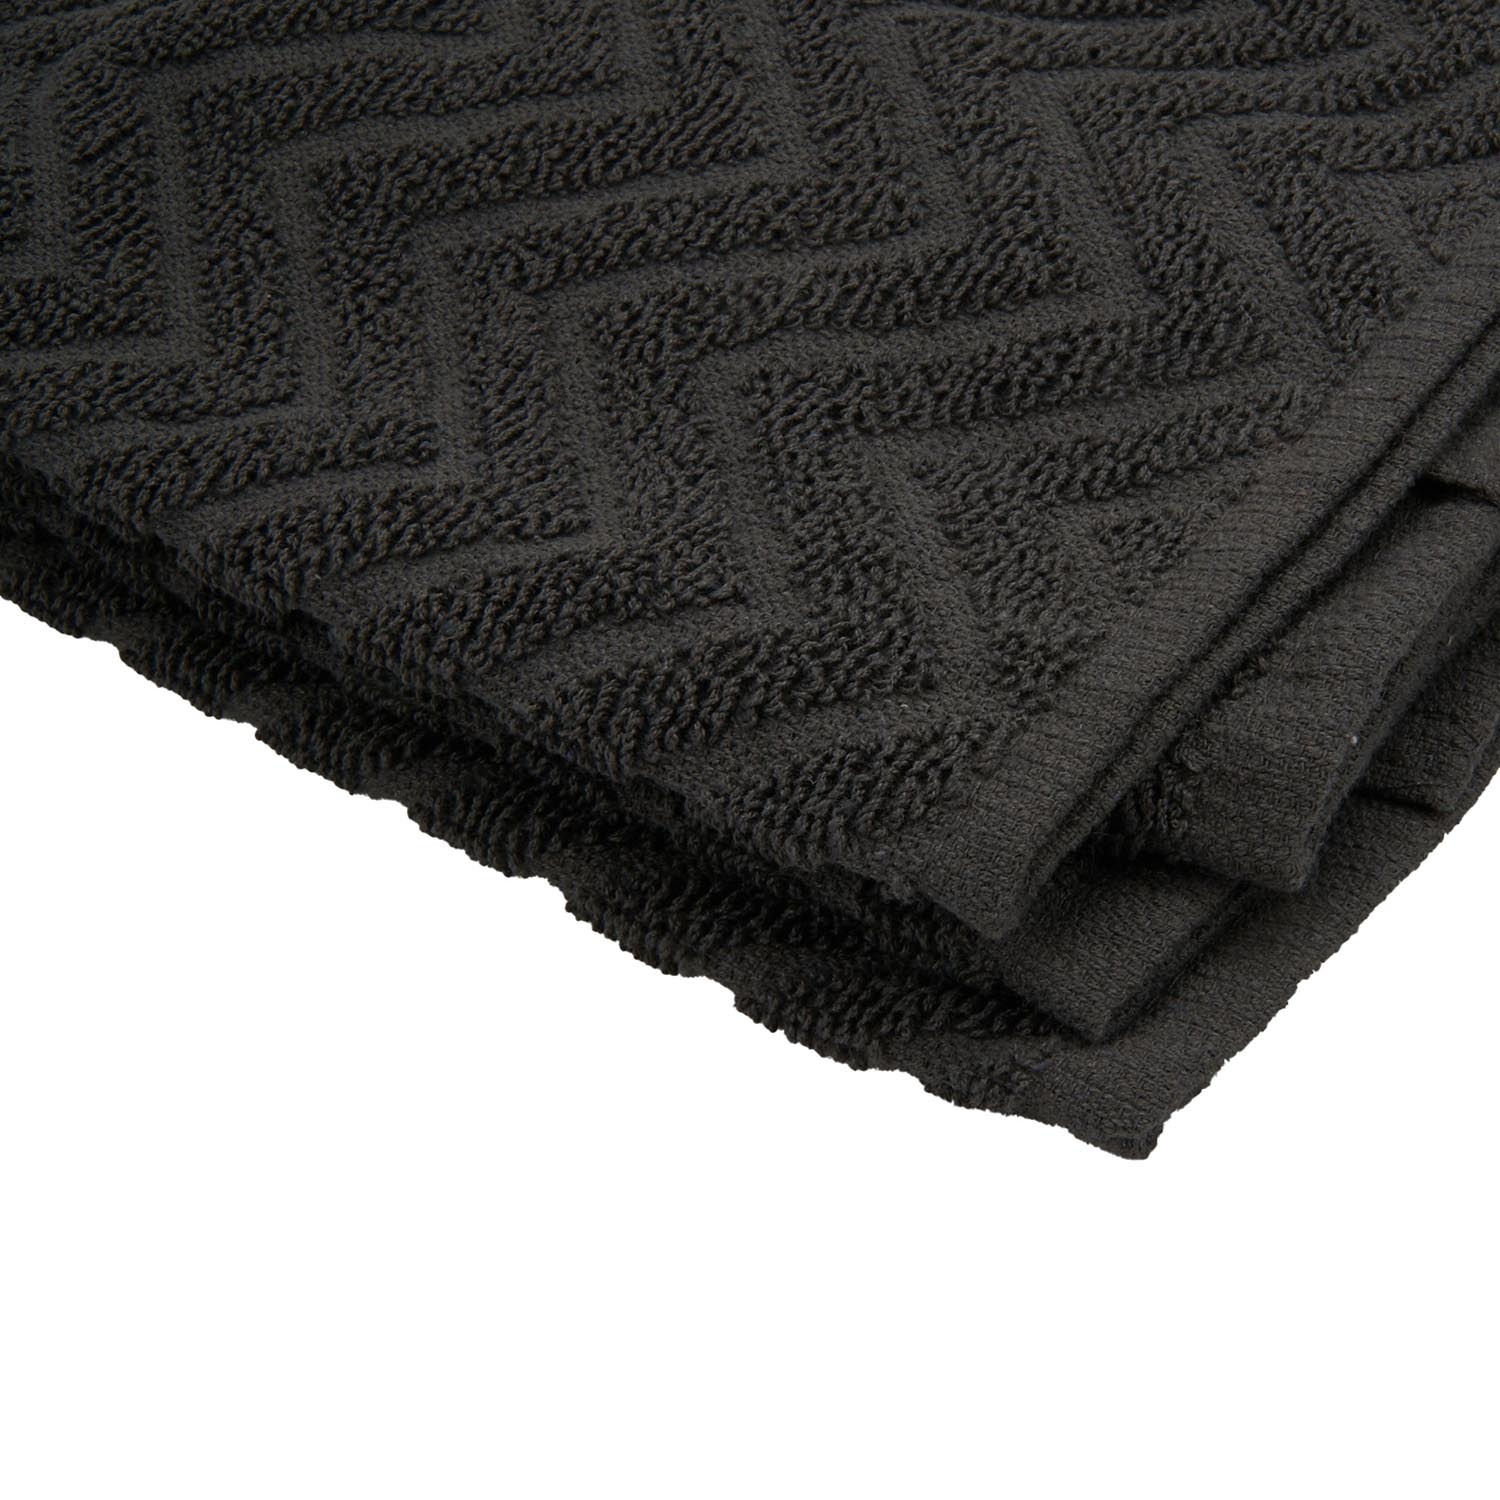 Pack of 2 Jacquard Terry Kitchen Towels - Dark Grey Image 4